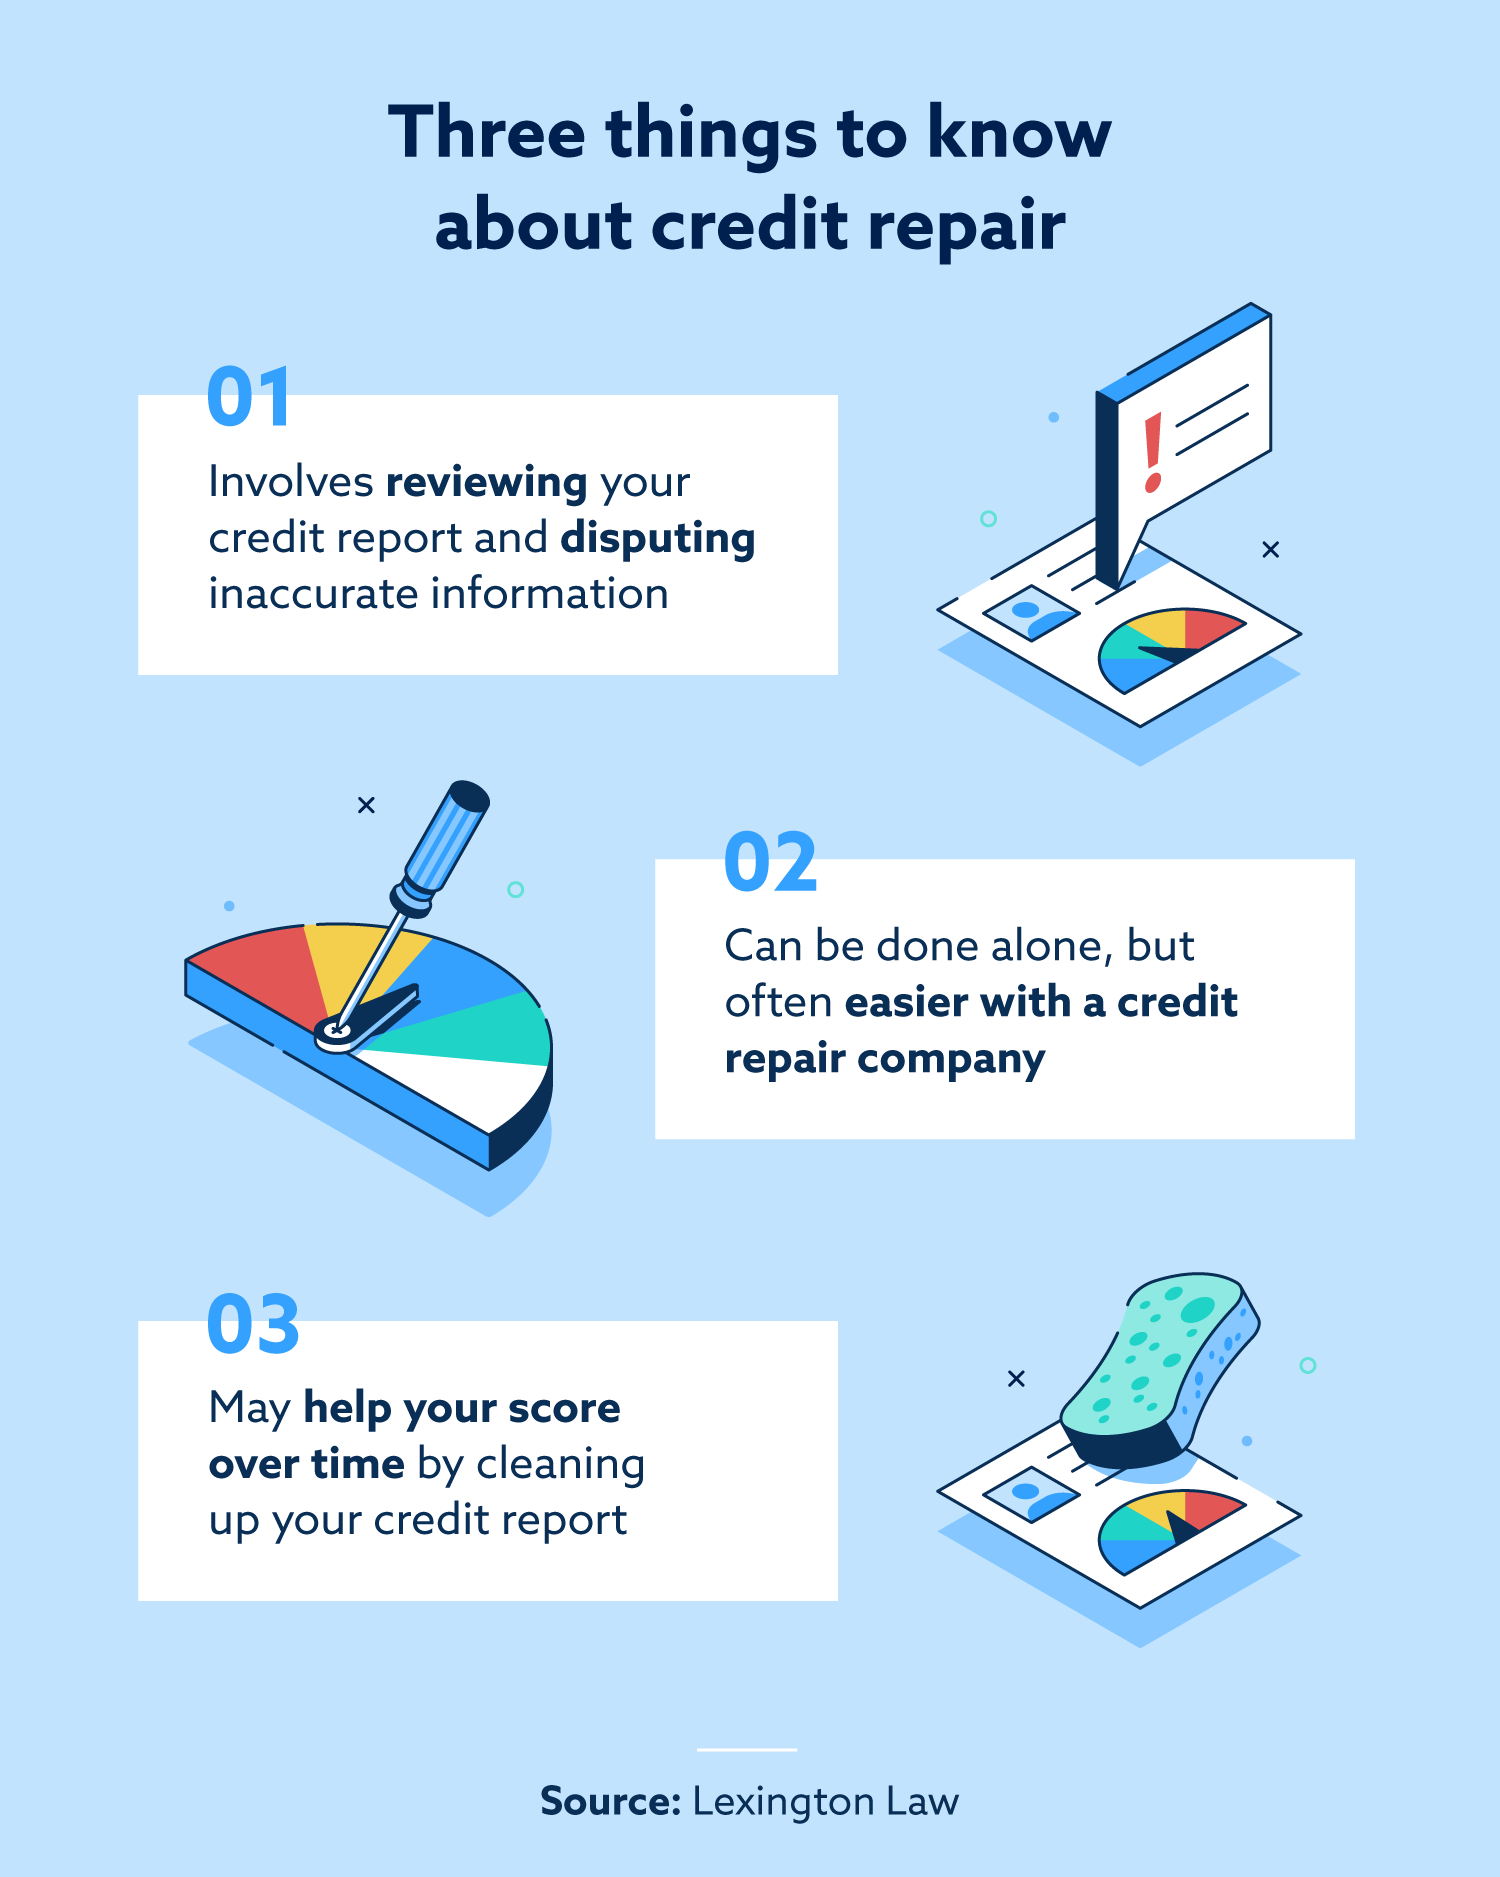 Three things to know about credit repair.